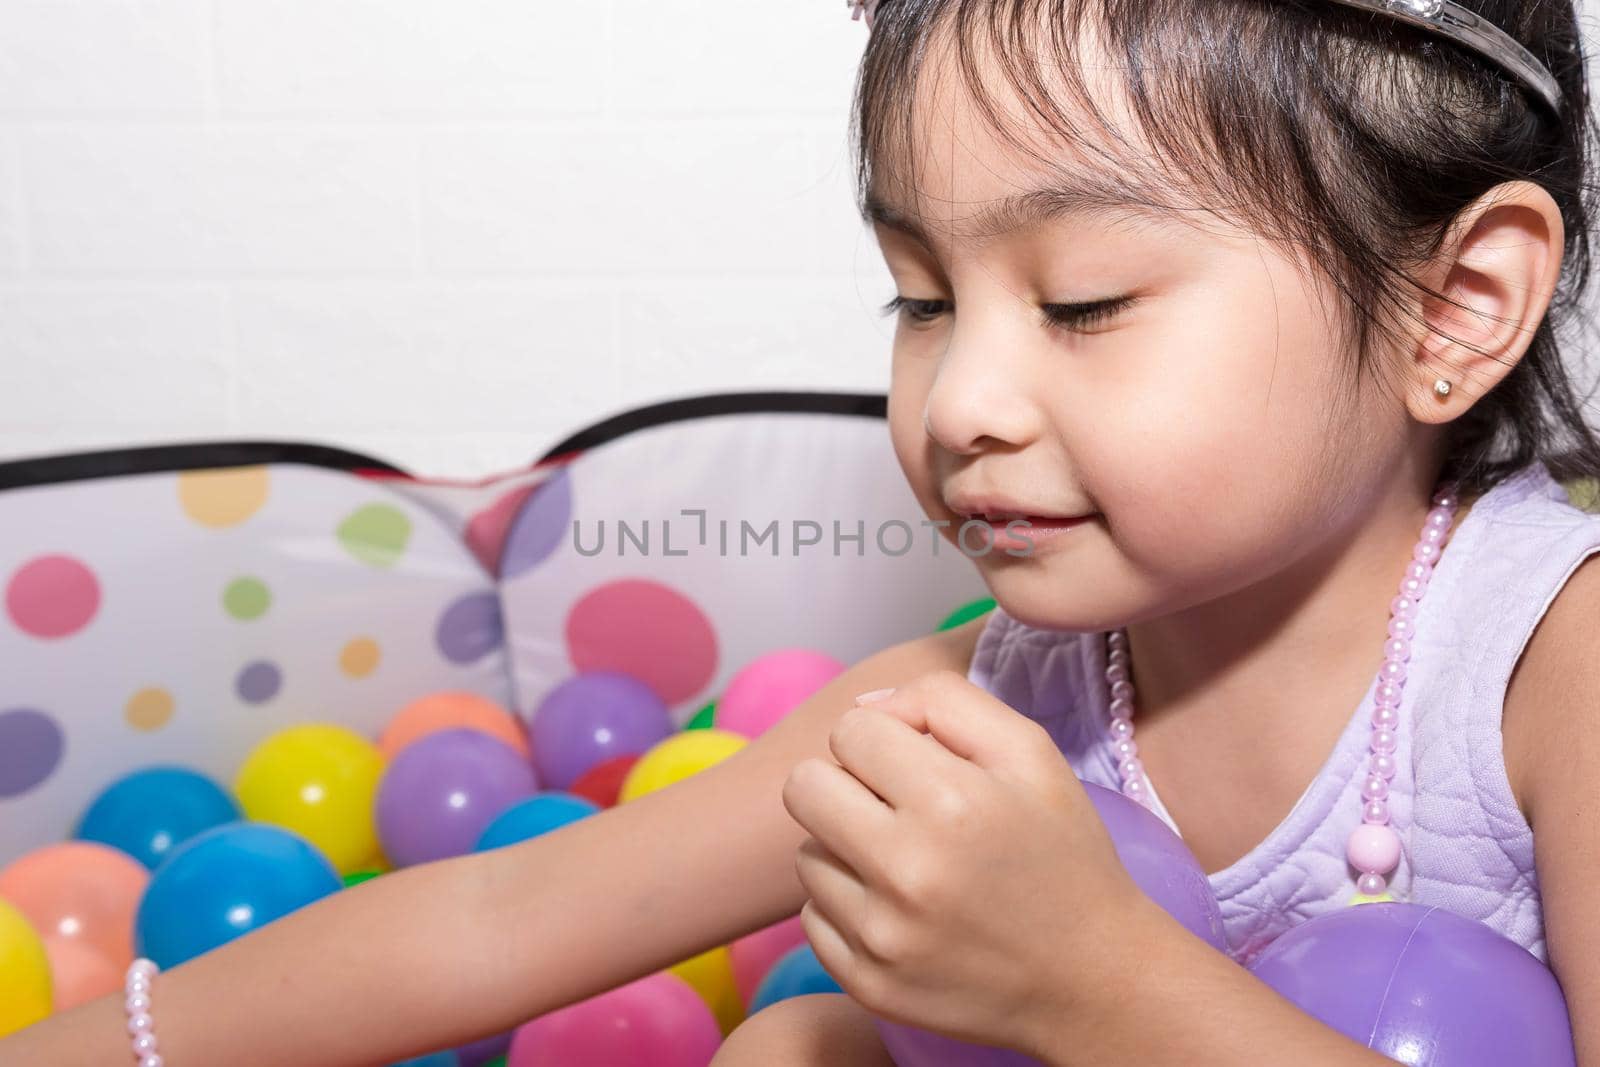 Female asian child girl  while sitting and playing with colorful plastic balls while wearing accessories like crown and necklace